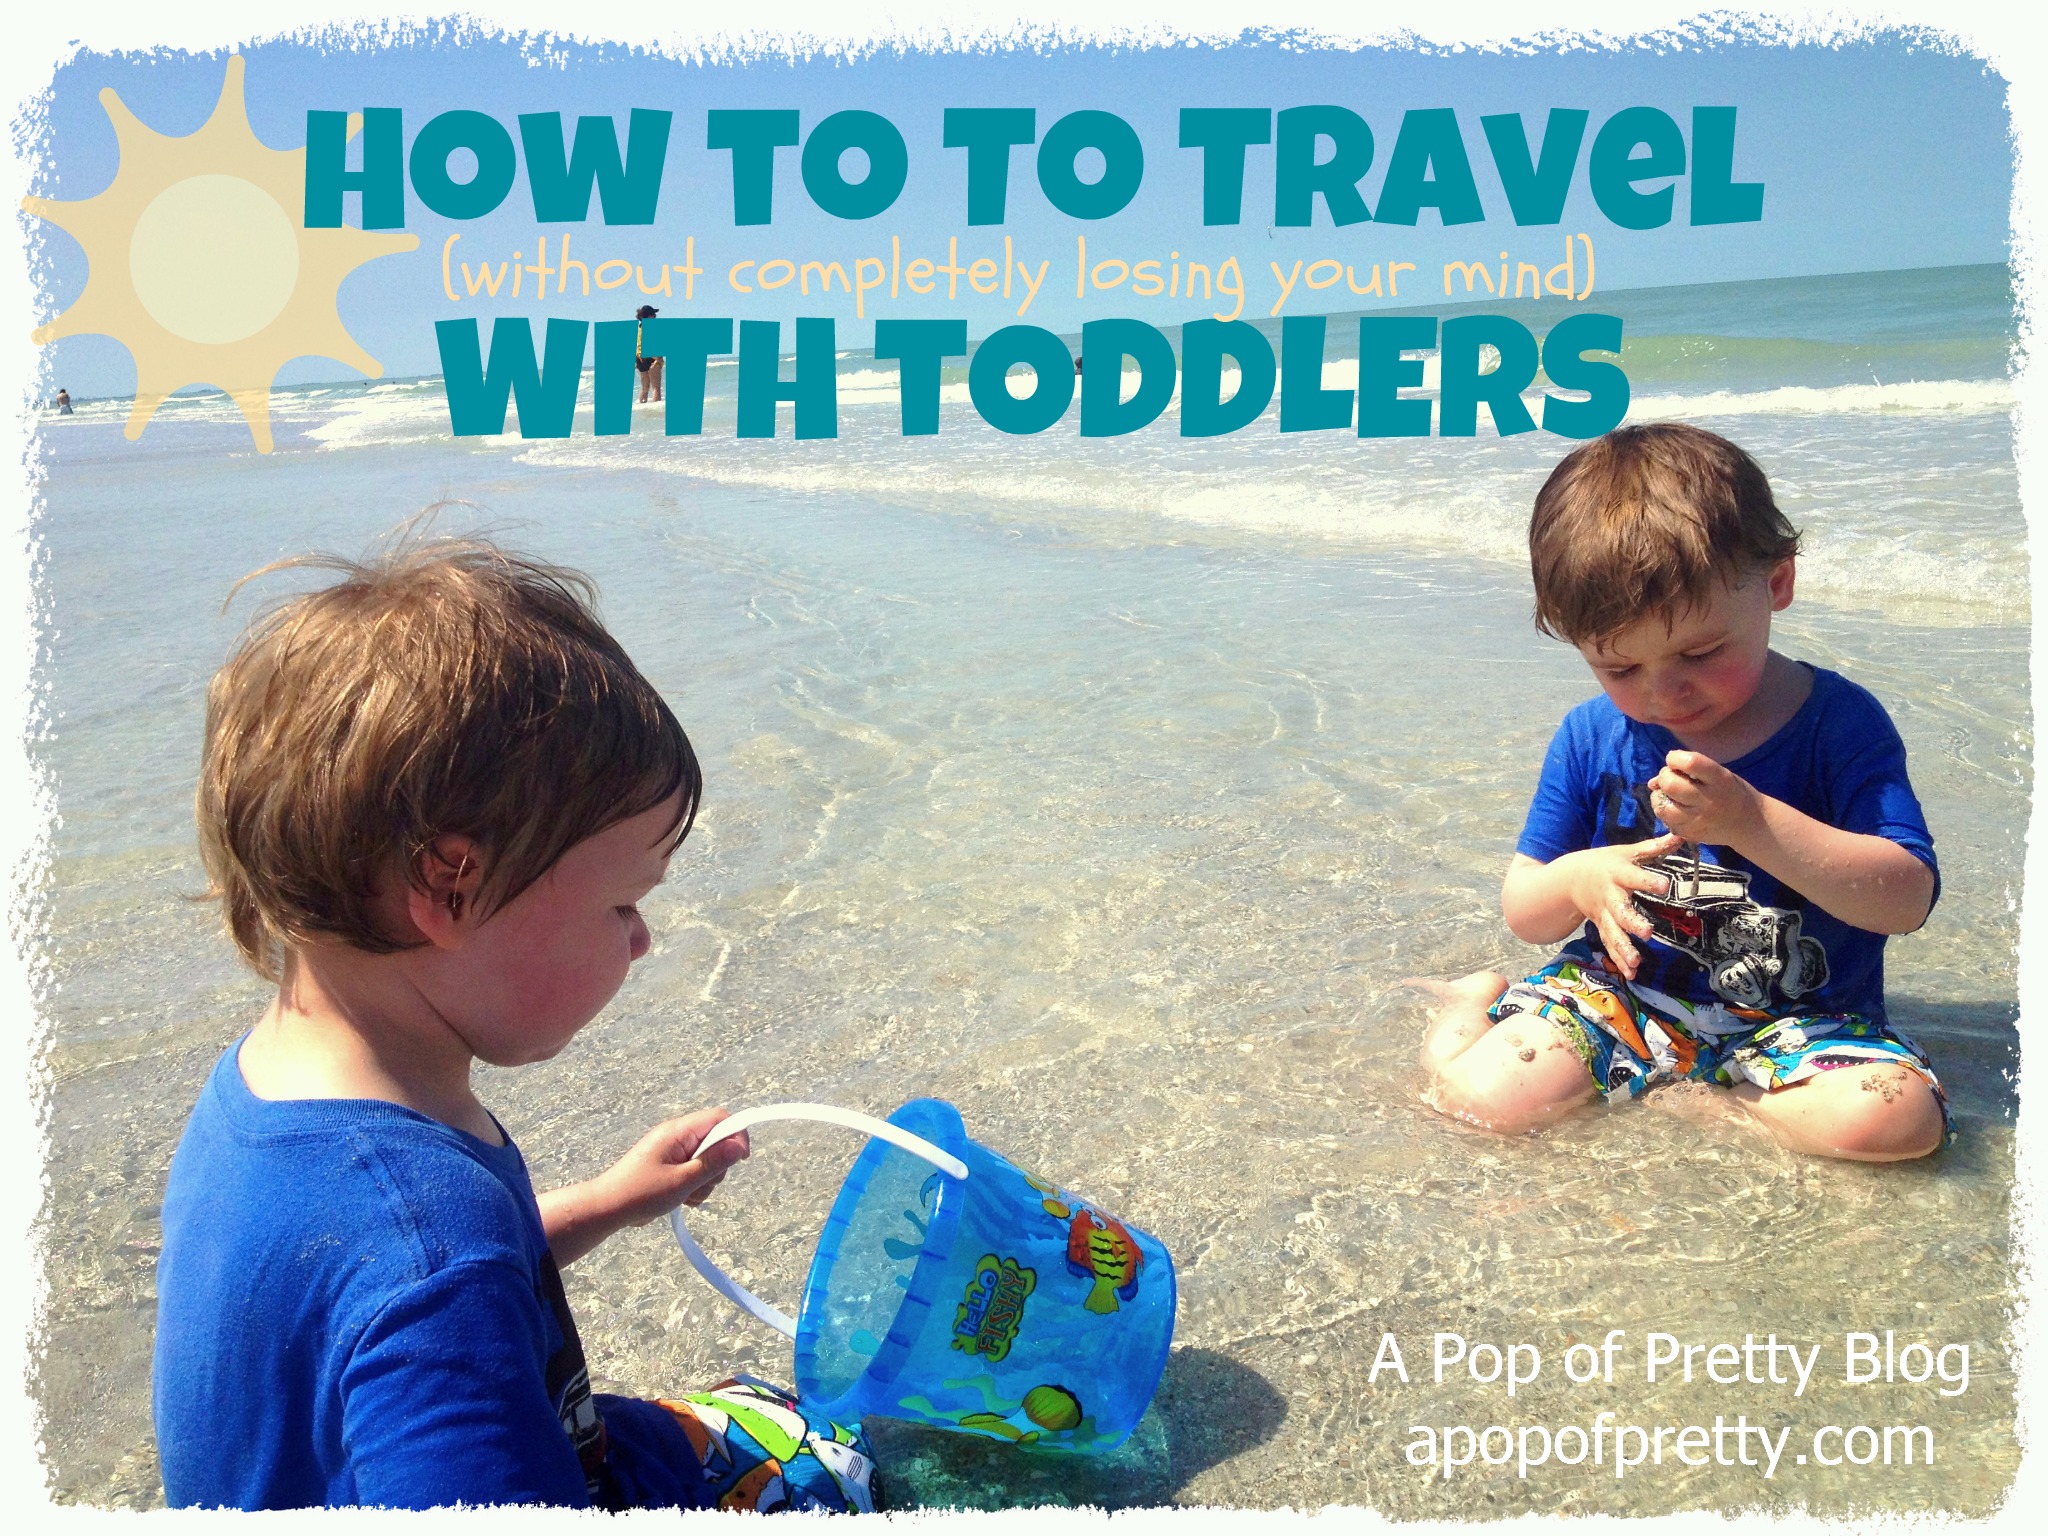 5 Tips for traveling with toddlers…without losing your freakin’ mind! (Traveling with children)